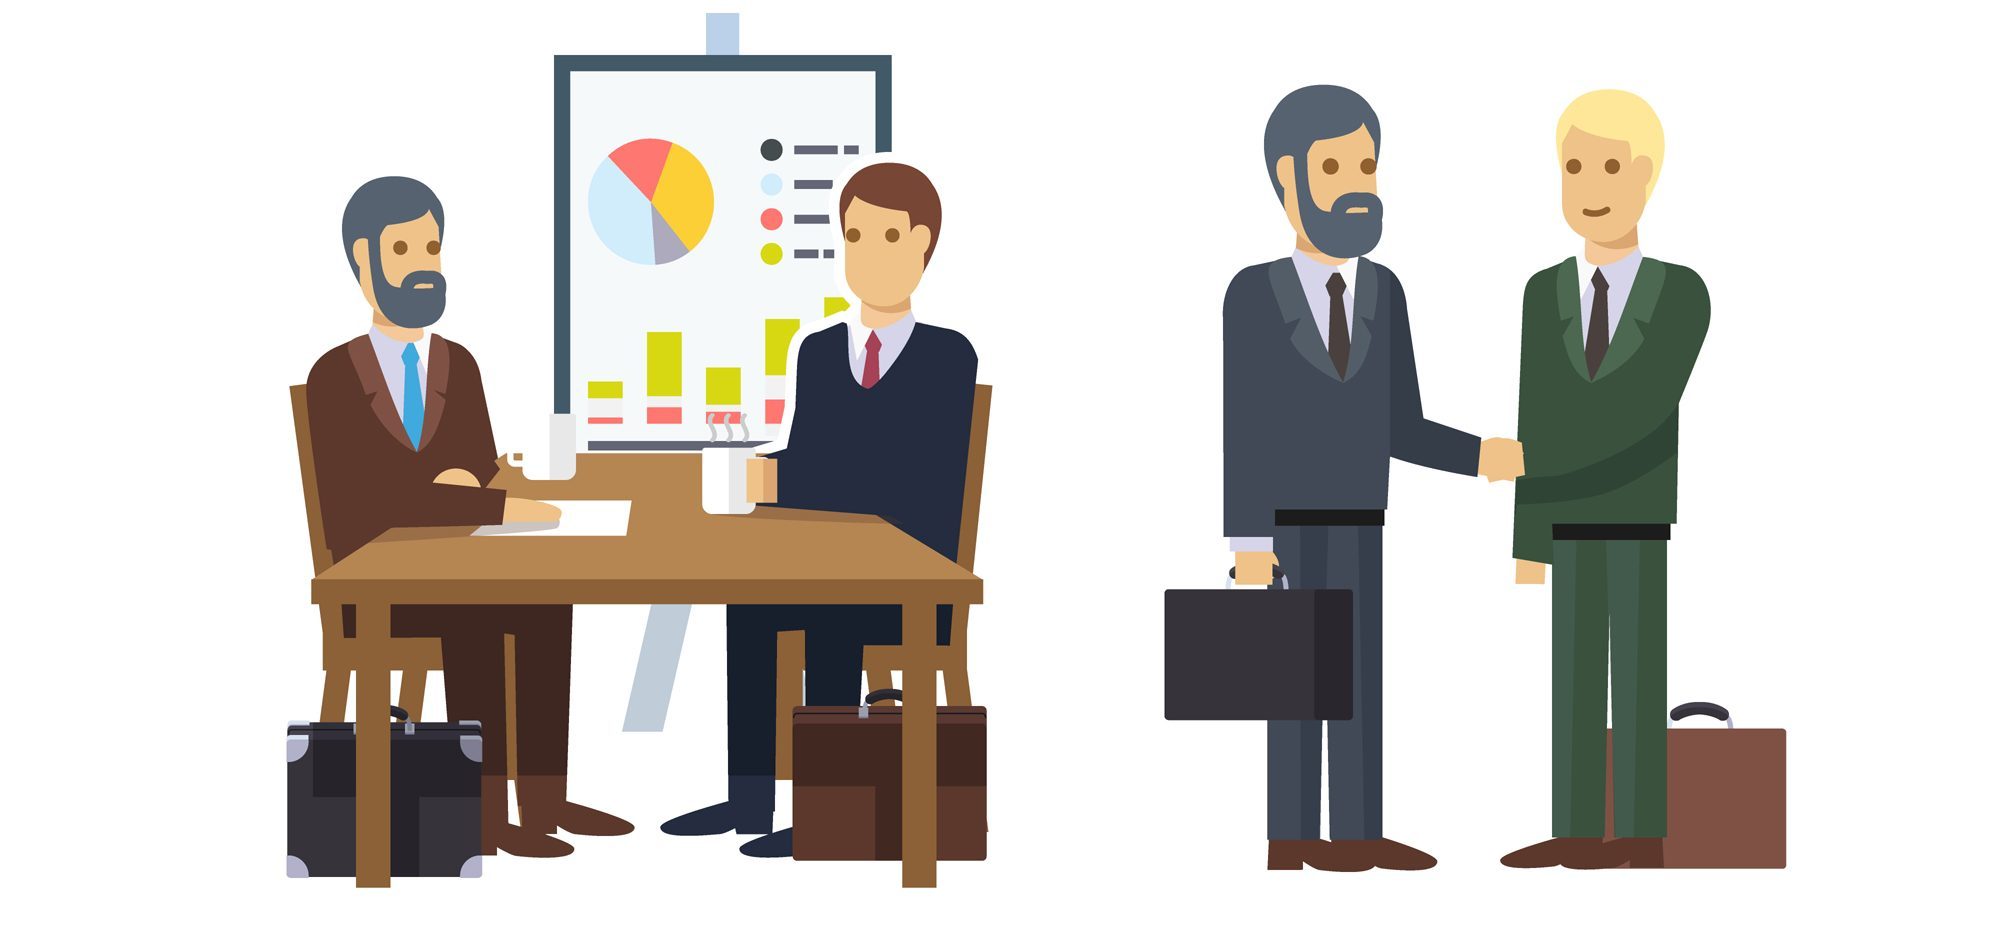 Business Job Interview, Brainstorming, Sale Closing, Handshake And Various Charts. Flat Icon Set. EPS 10 Vector.